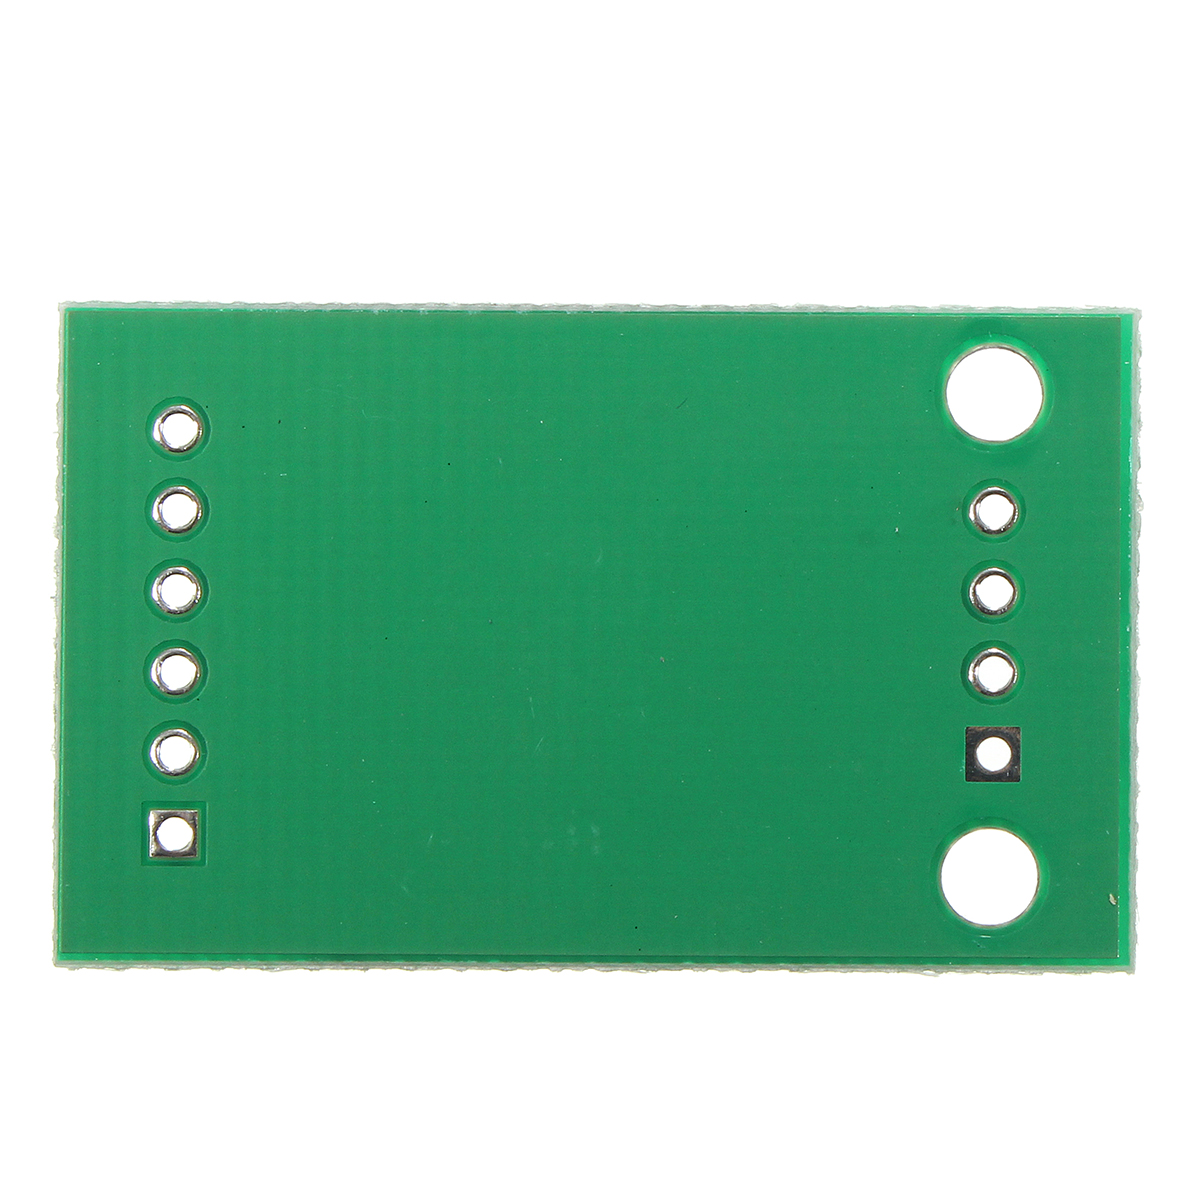 5Pcs-10kg-Aluminum-Alloy-Small-Scale-Weighing-Pressure-Sensor-With-HX711-AD-Module-1136340